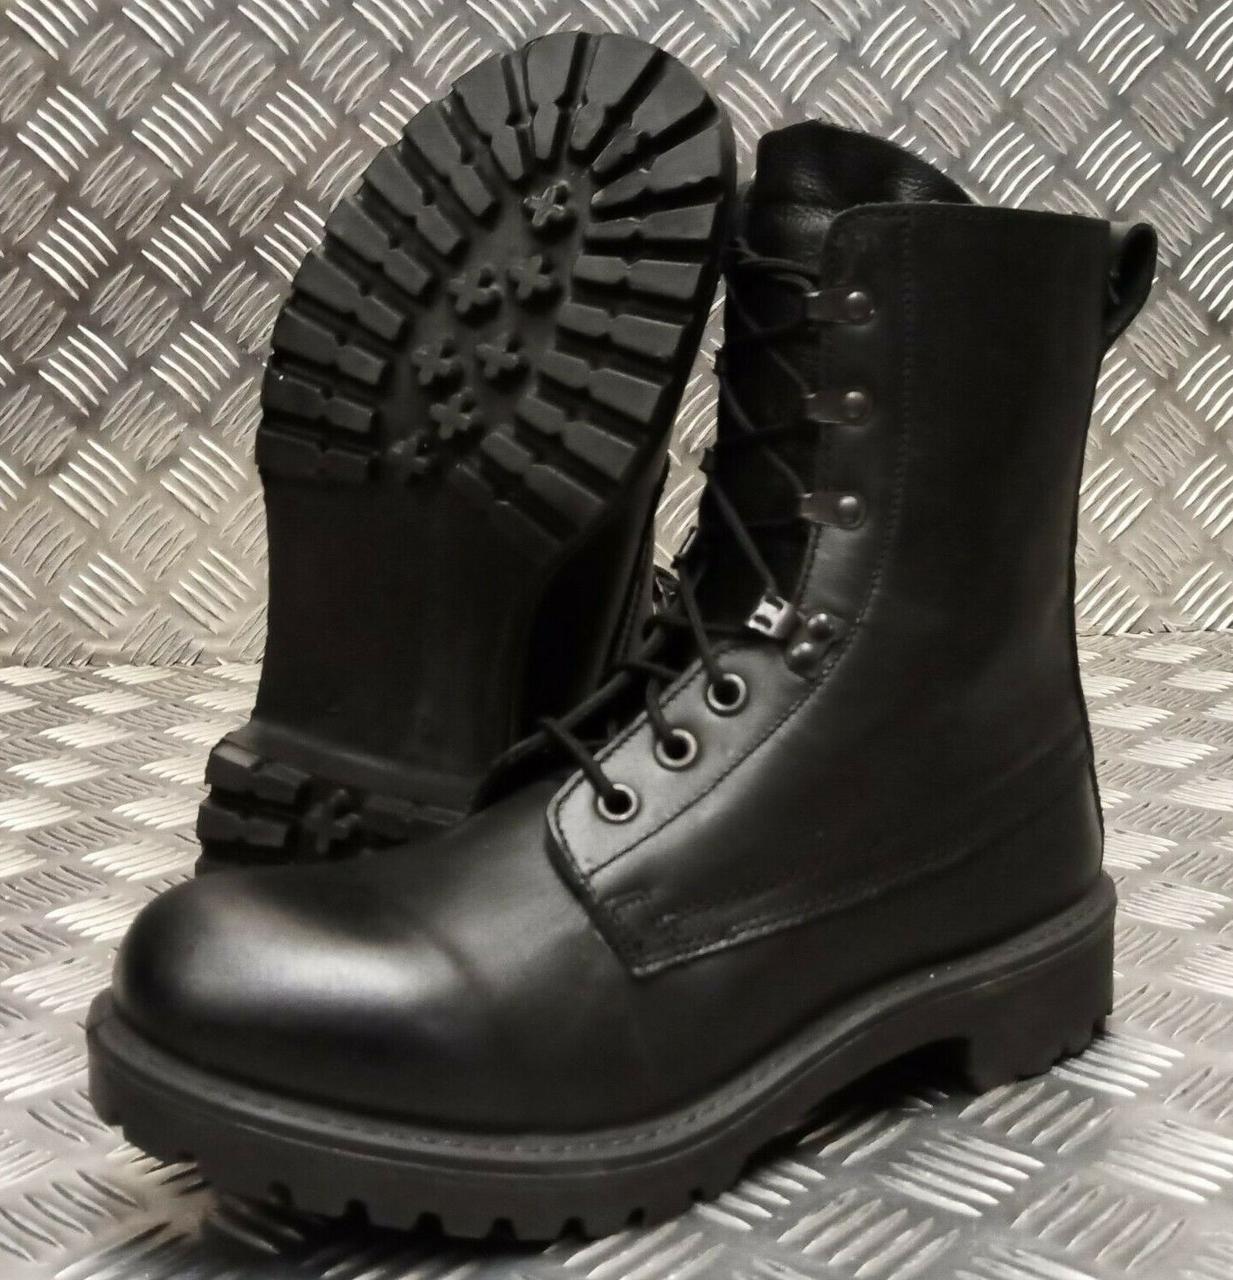 British Army Military ASSAULT Boots 